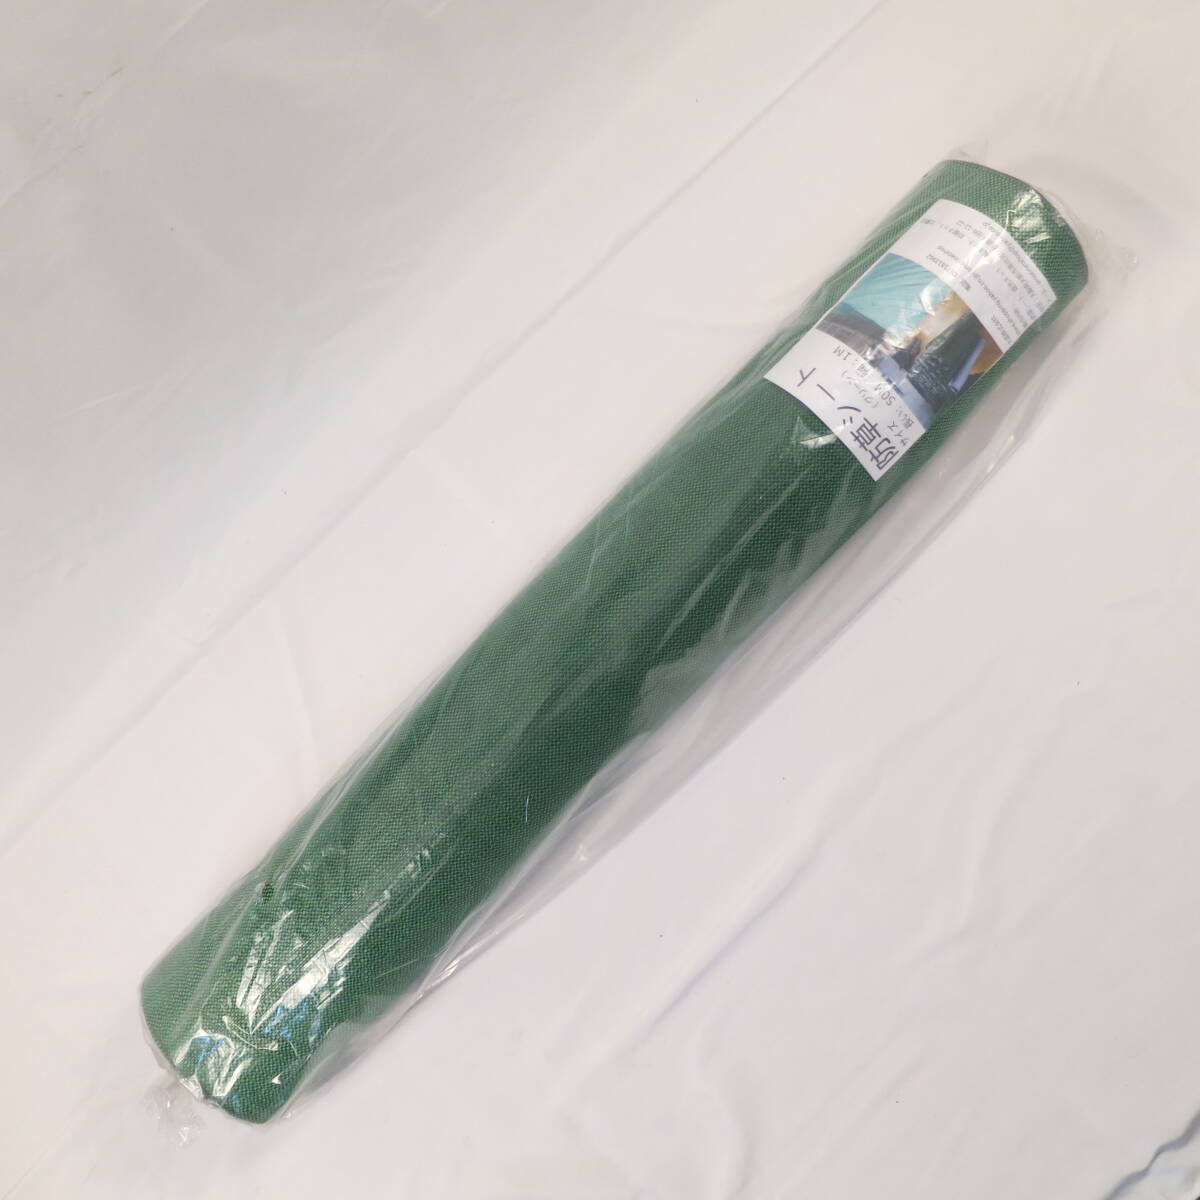  weed proofing seat 1m×50m green color free shipping 